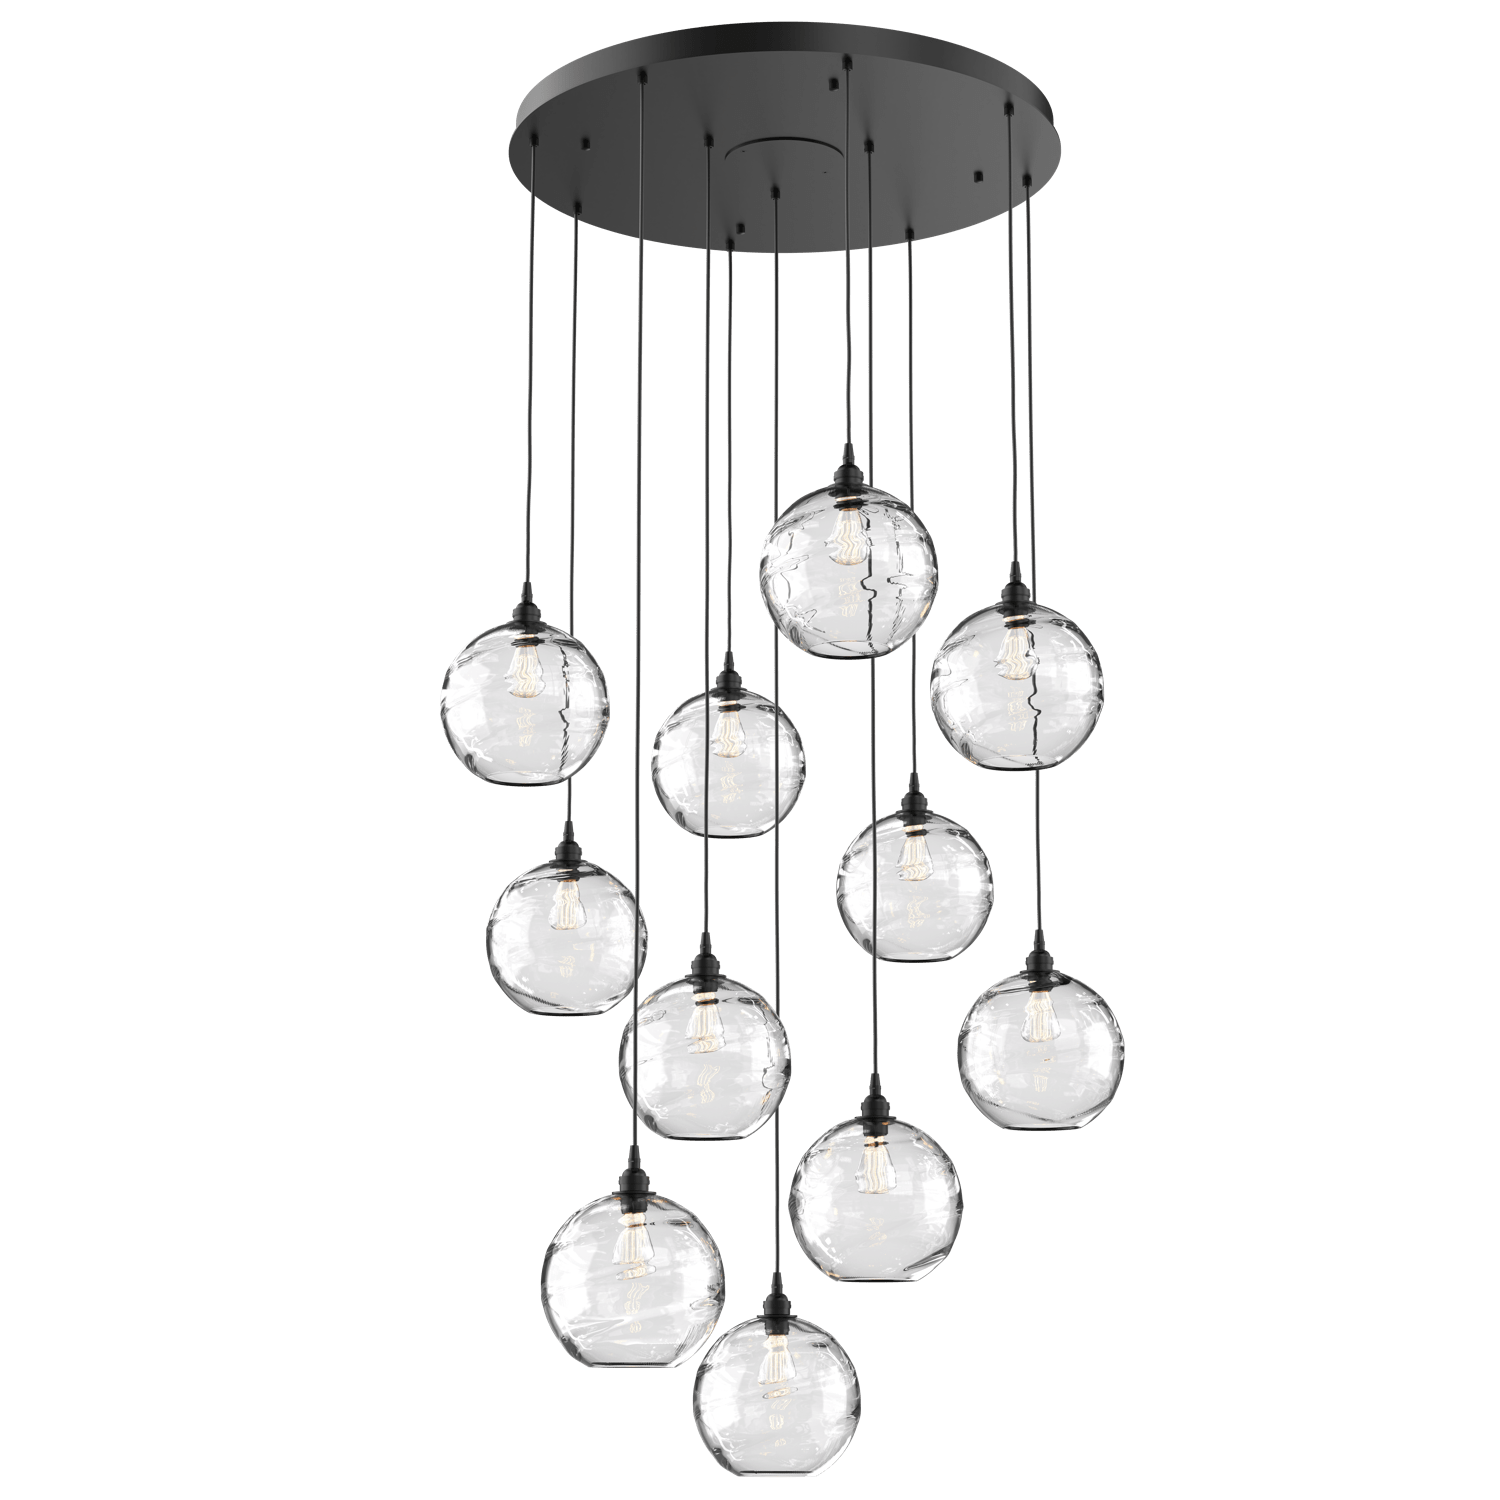 CHB0047-11-MB-OC-Hammerton-Studio-Optic-Blown-Glass-Terra-11-light-round-pendant-chandelier-with-matte-black-finish-and-optic-clear-blown-glass-shades-and-incandescent-lamping